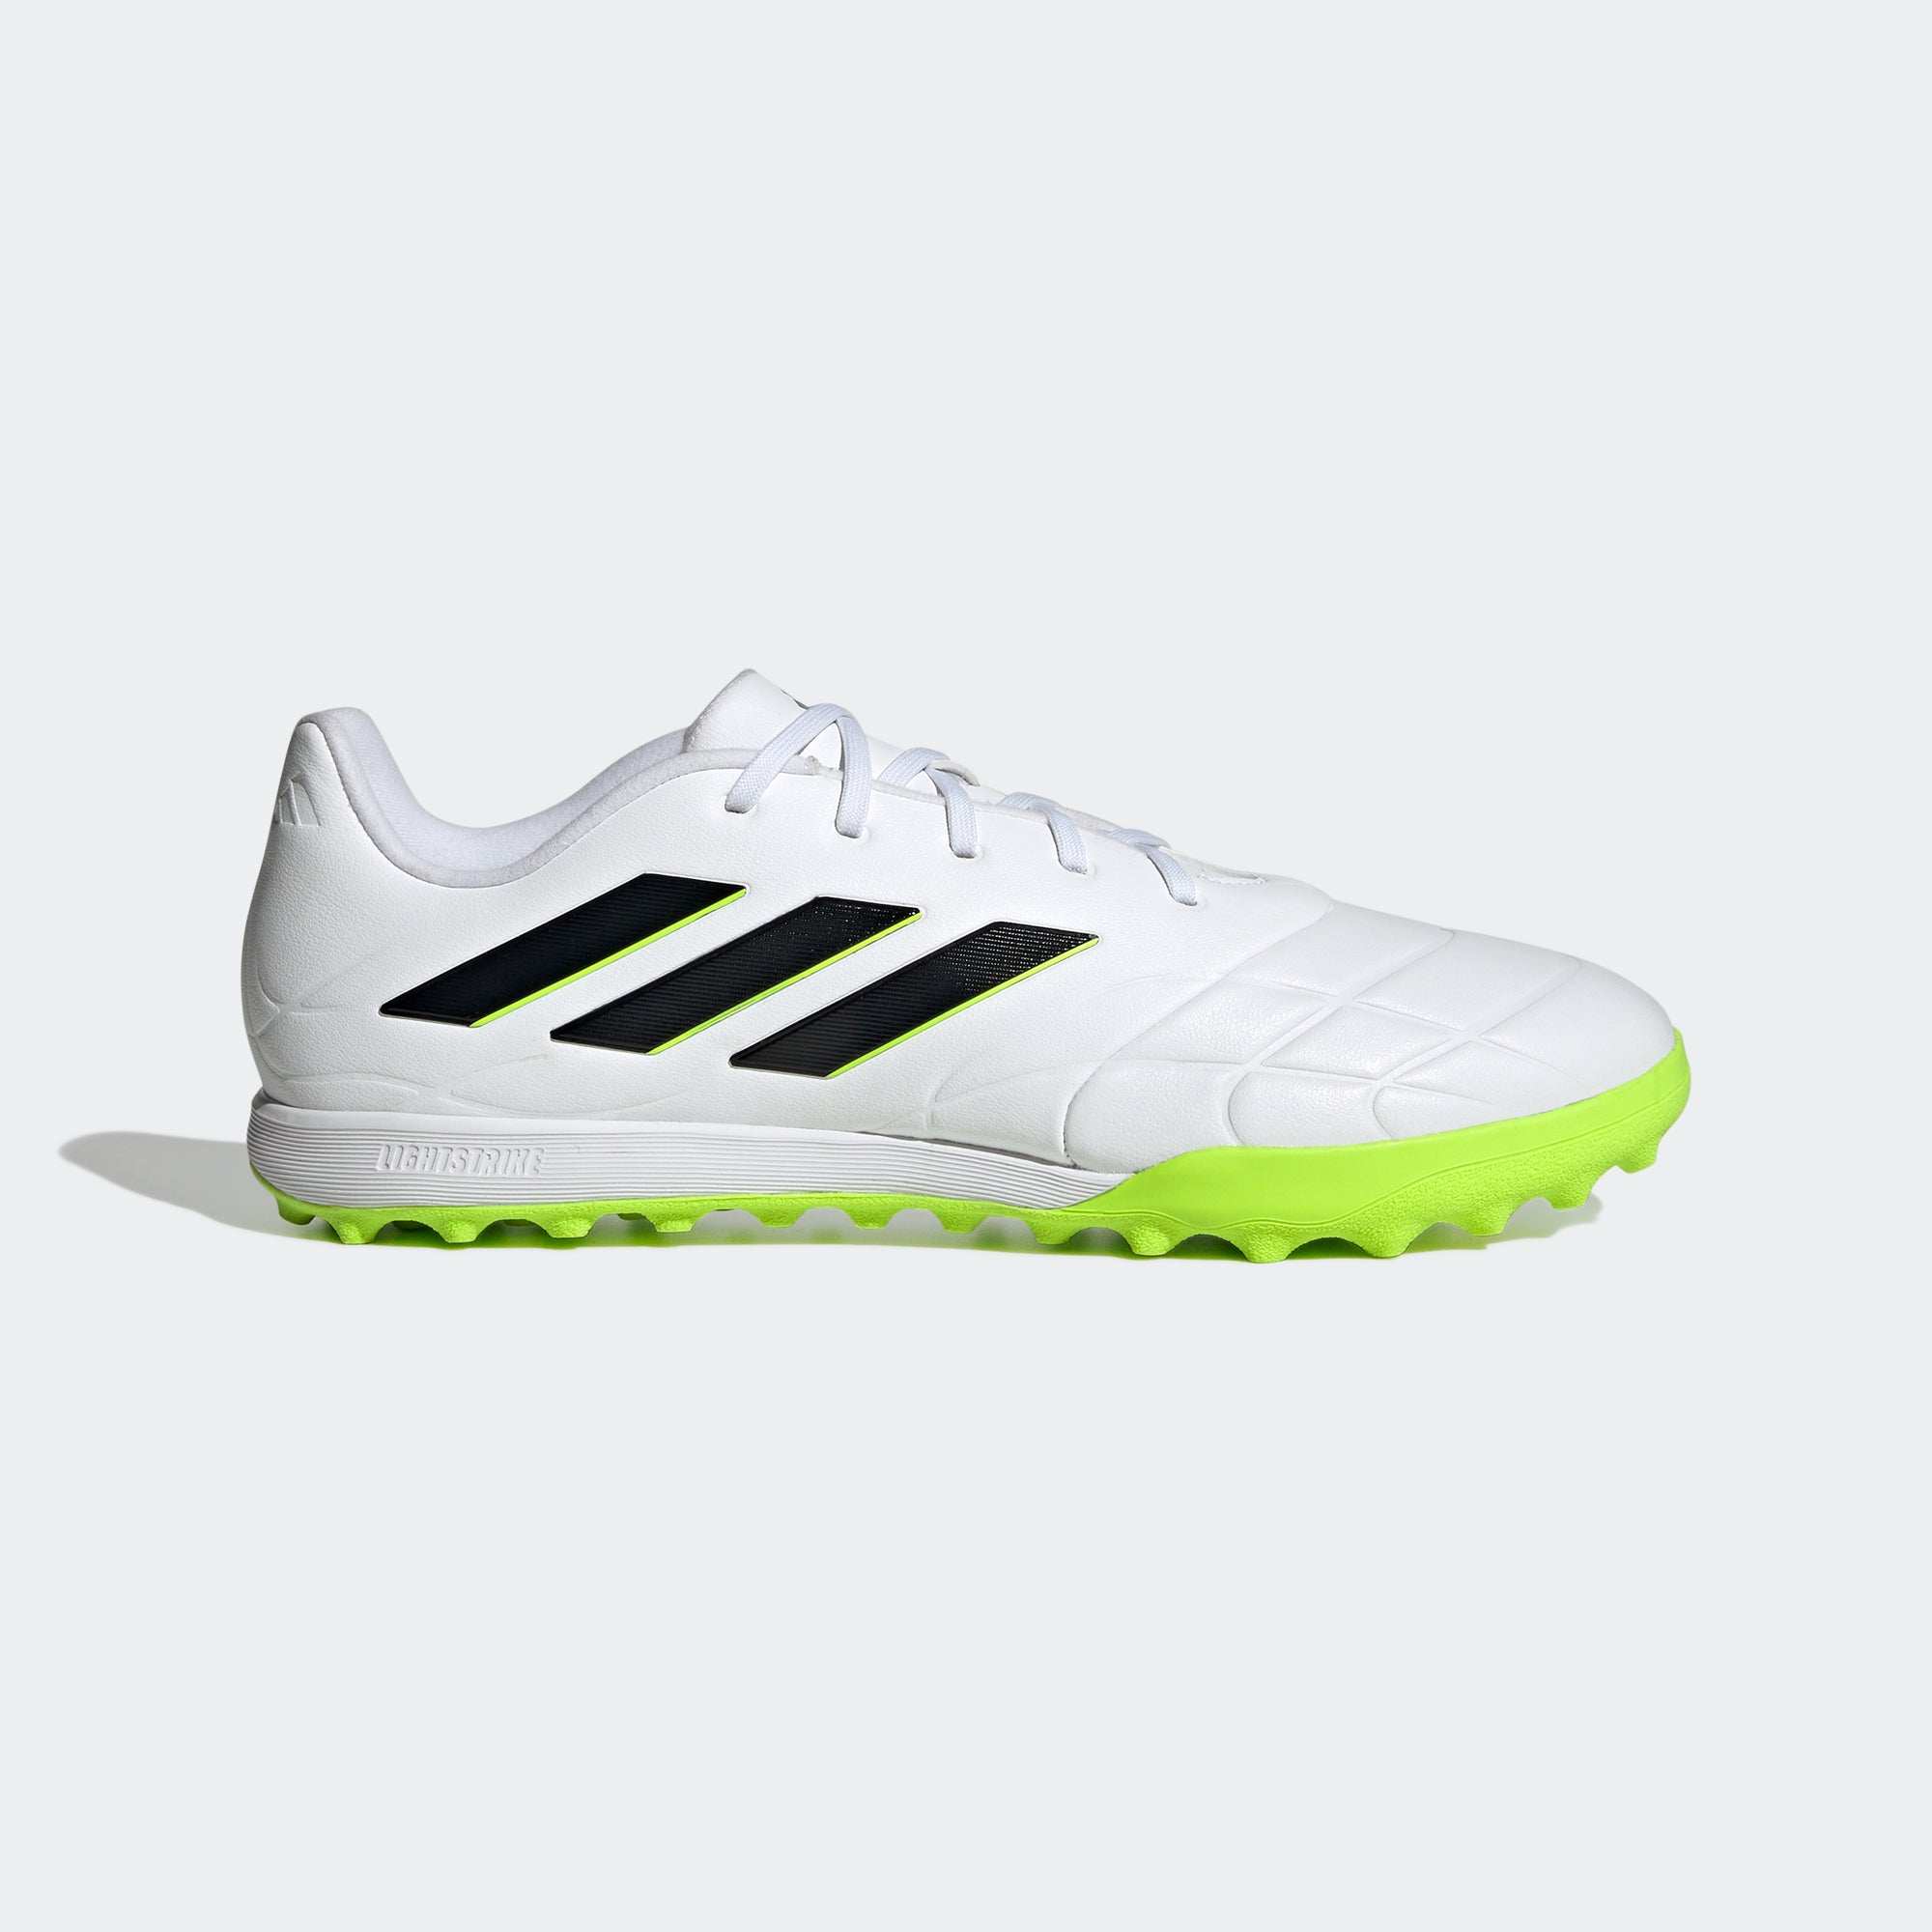 adidas Copa Pure.3 Turf Soccer Shoes